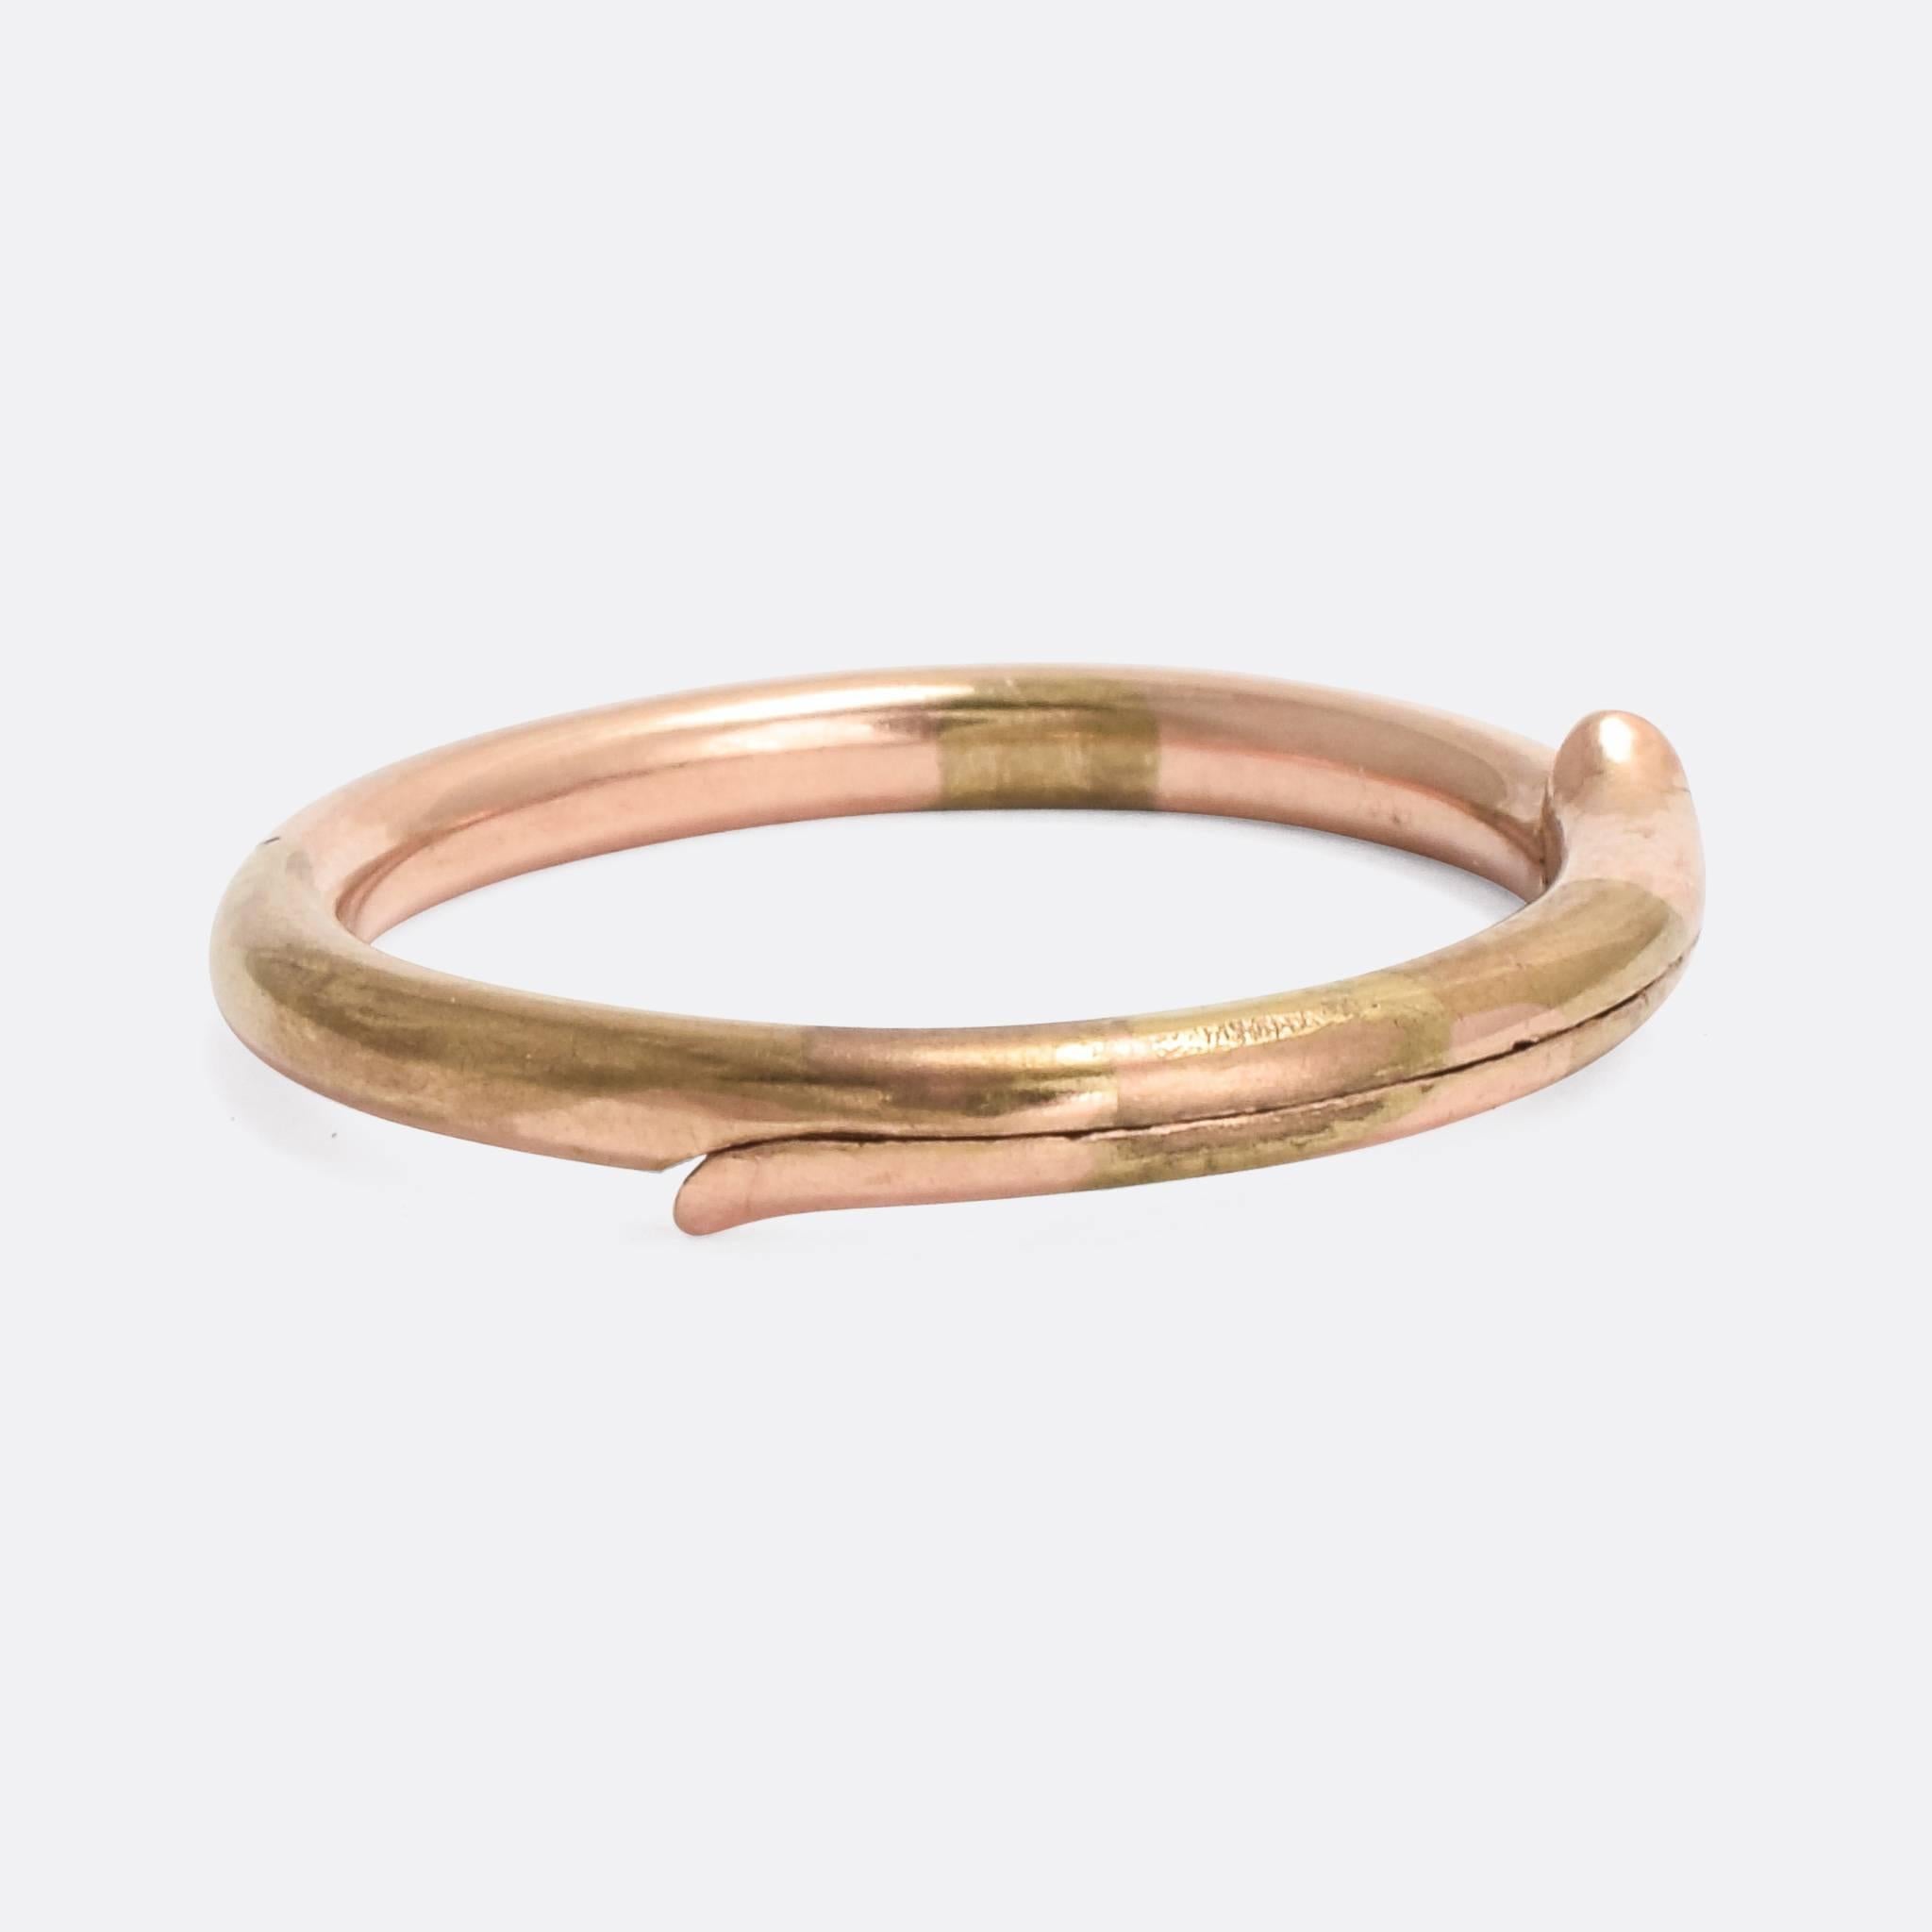 An unusual antique split ring modelled in 9 karat gold. The edges of the split flare out in a sort of snake-like way. It dates from the late Victorian era, circa 1880 - perfect for holding your collection of charms.

MEASUREMENTS 
22.8mm